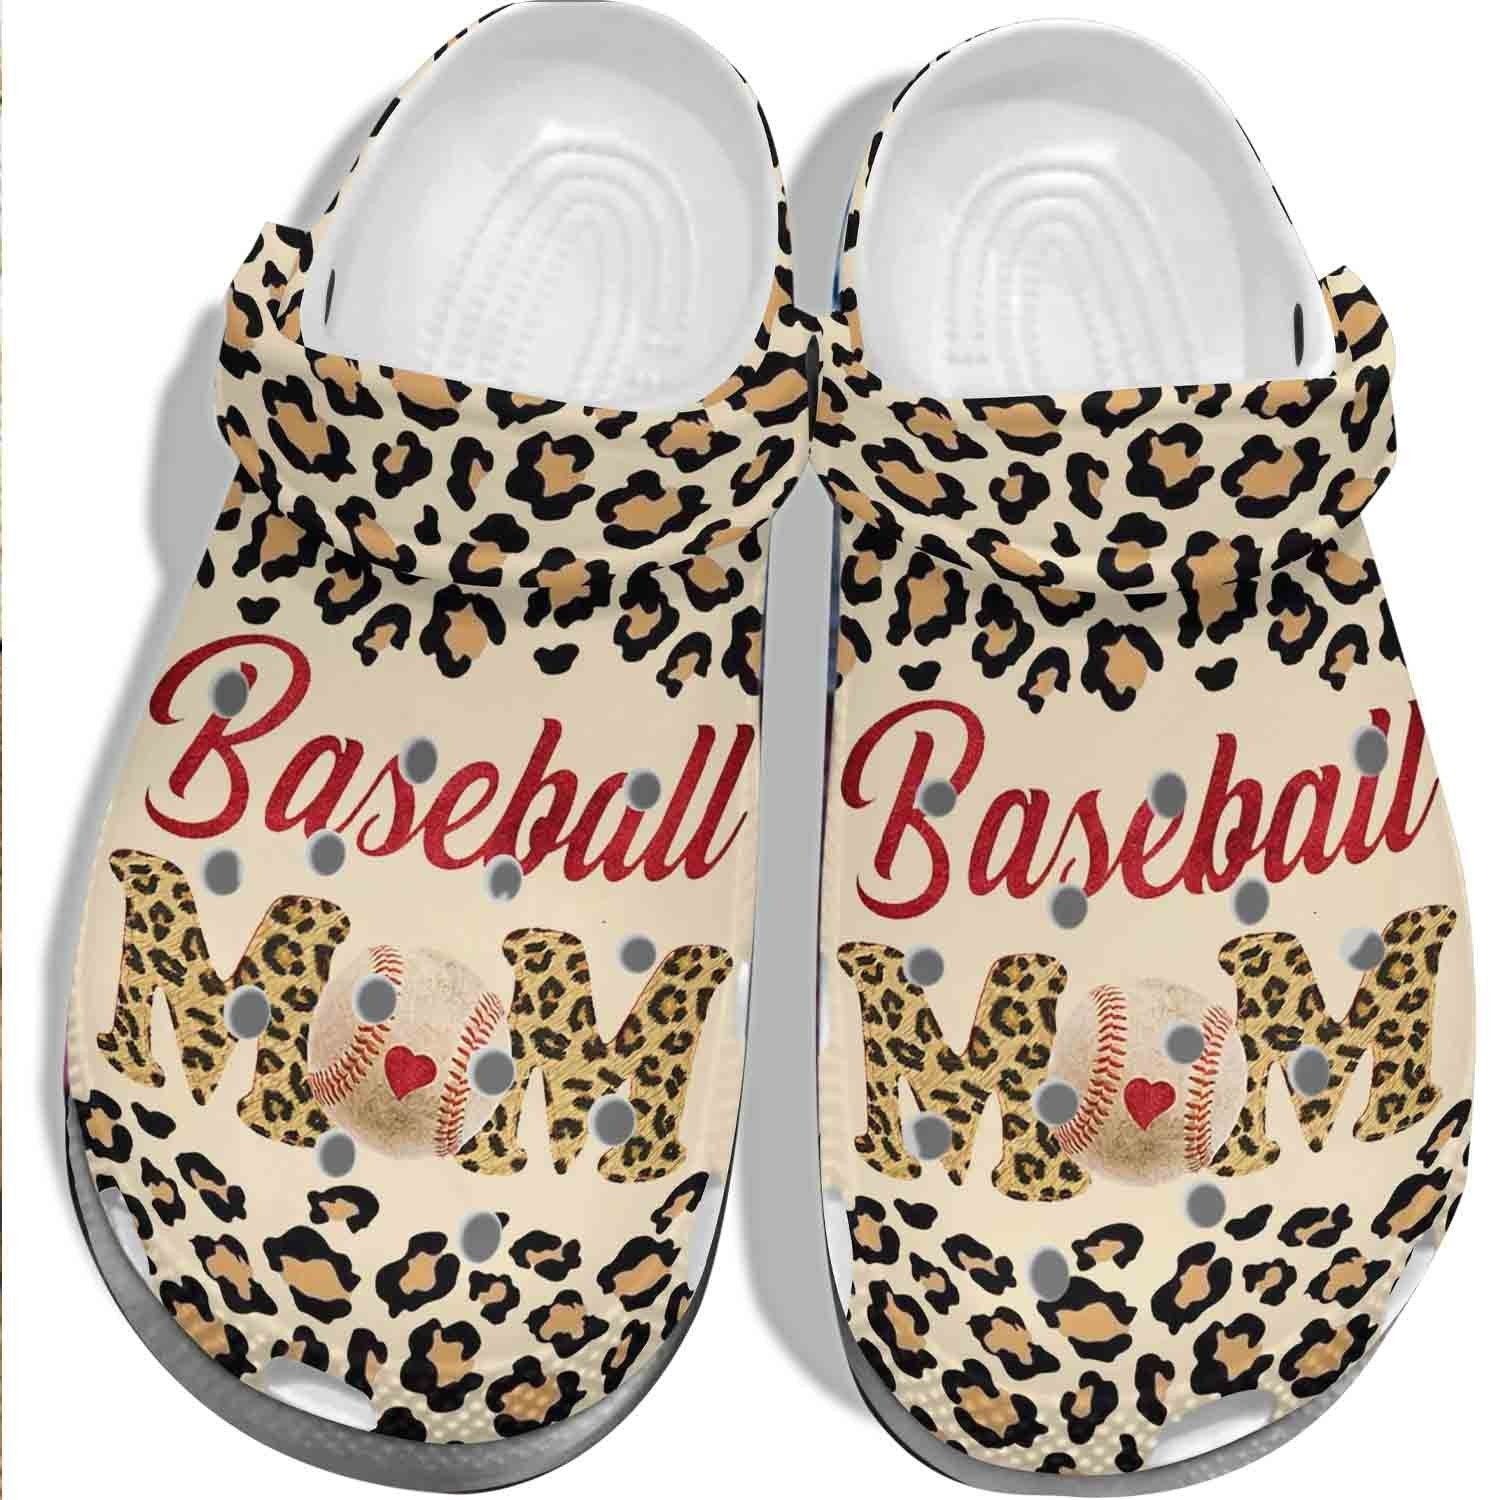 Animal Skin Baseball With Heart Outdoor Shoe - Baseball Mom Custom Crocs Shoes Clogs For Mother Day